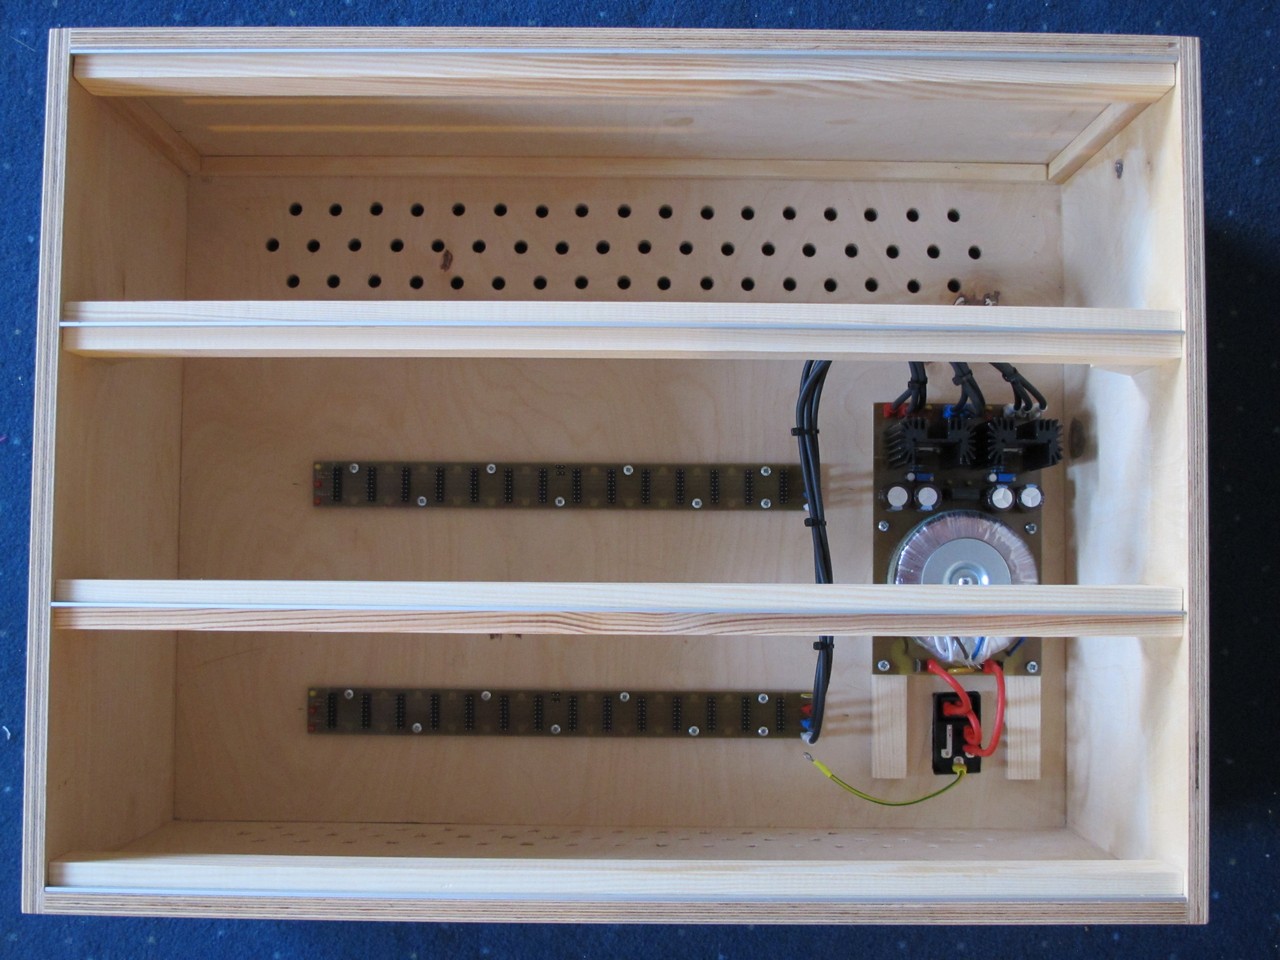 Finished modular synth case